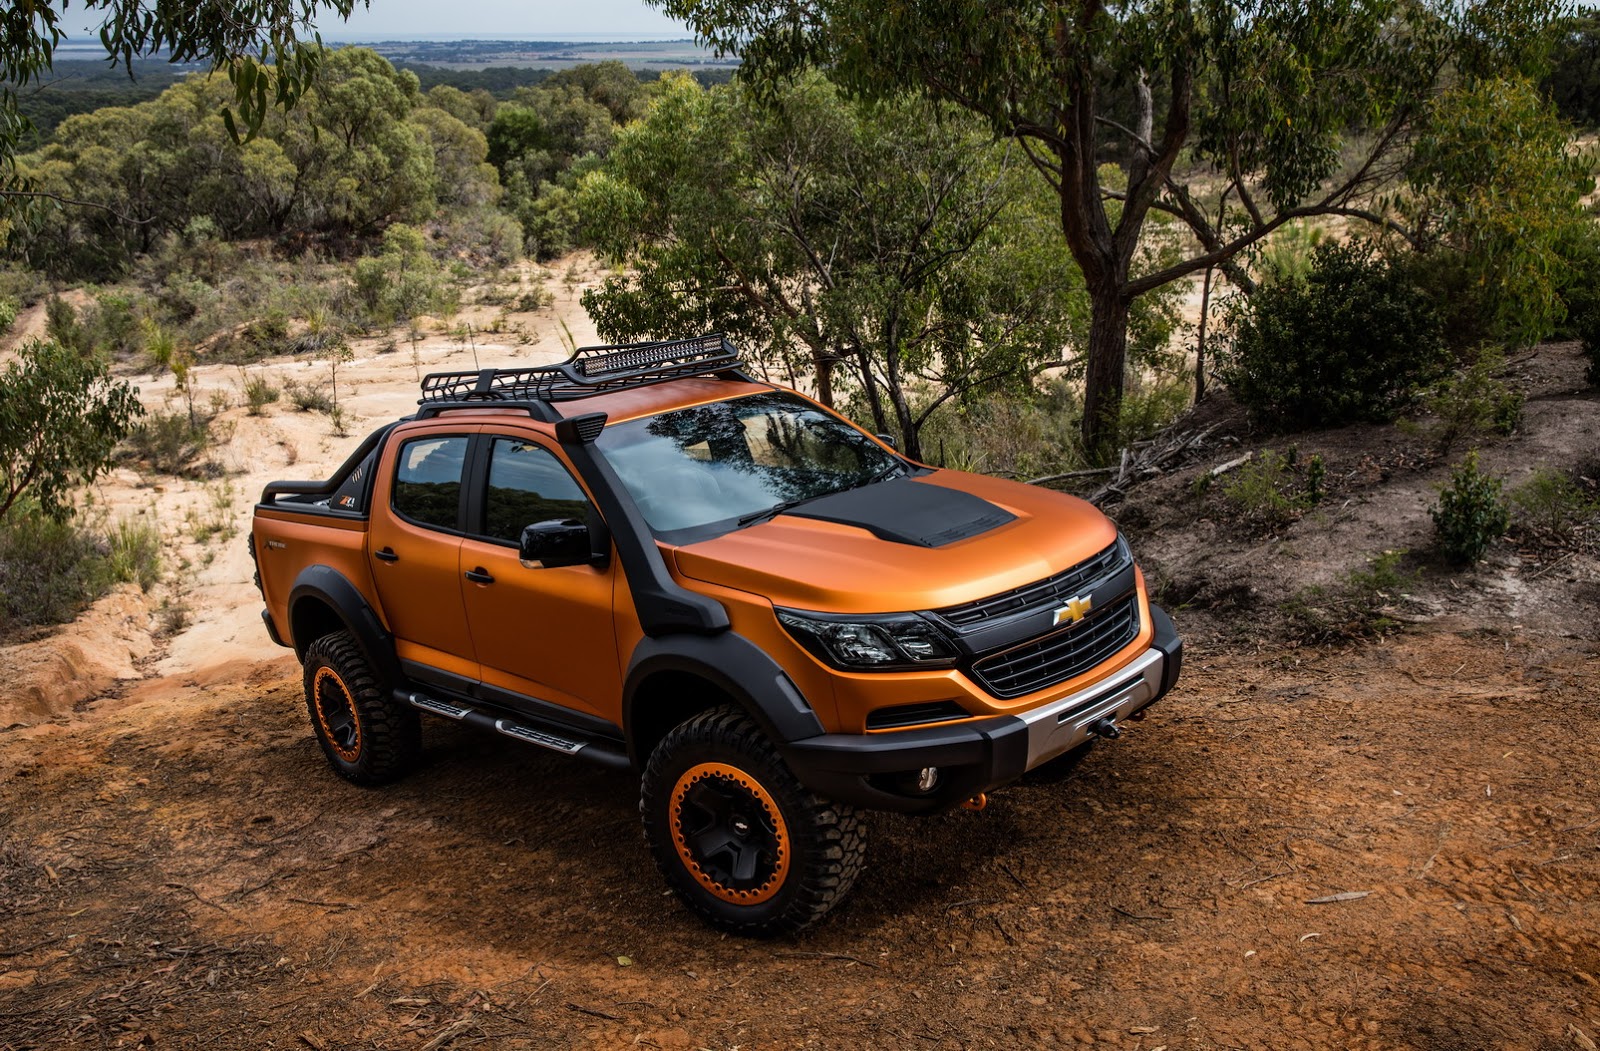 Chevrolet Colorado Xtreme Study Previews The Global Model's Facelift ...